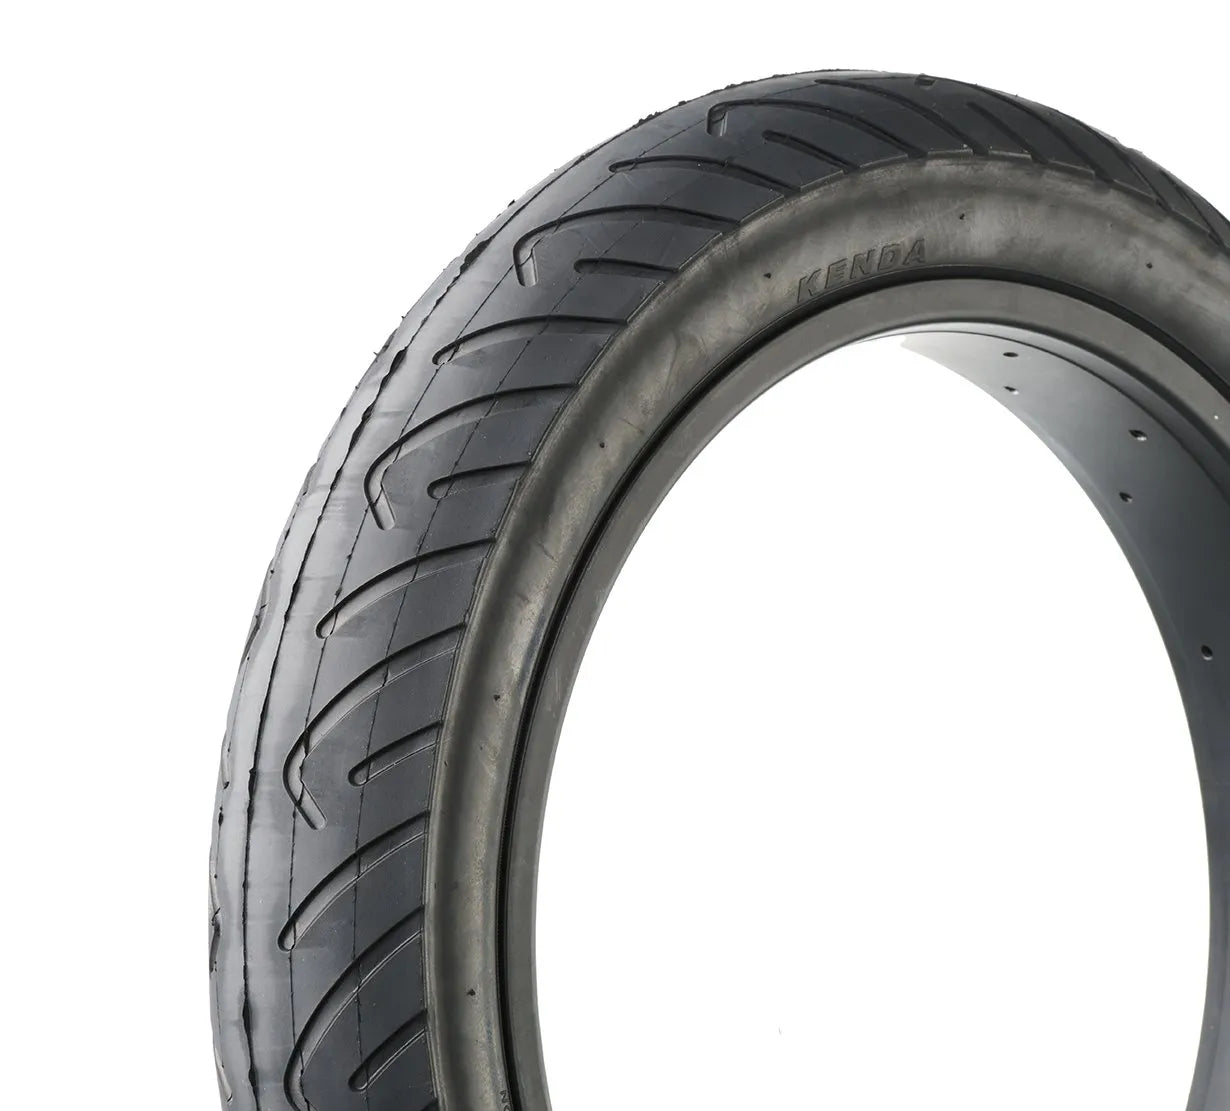 Synch e-bike road tyres